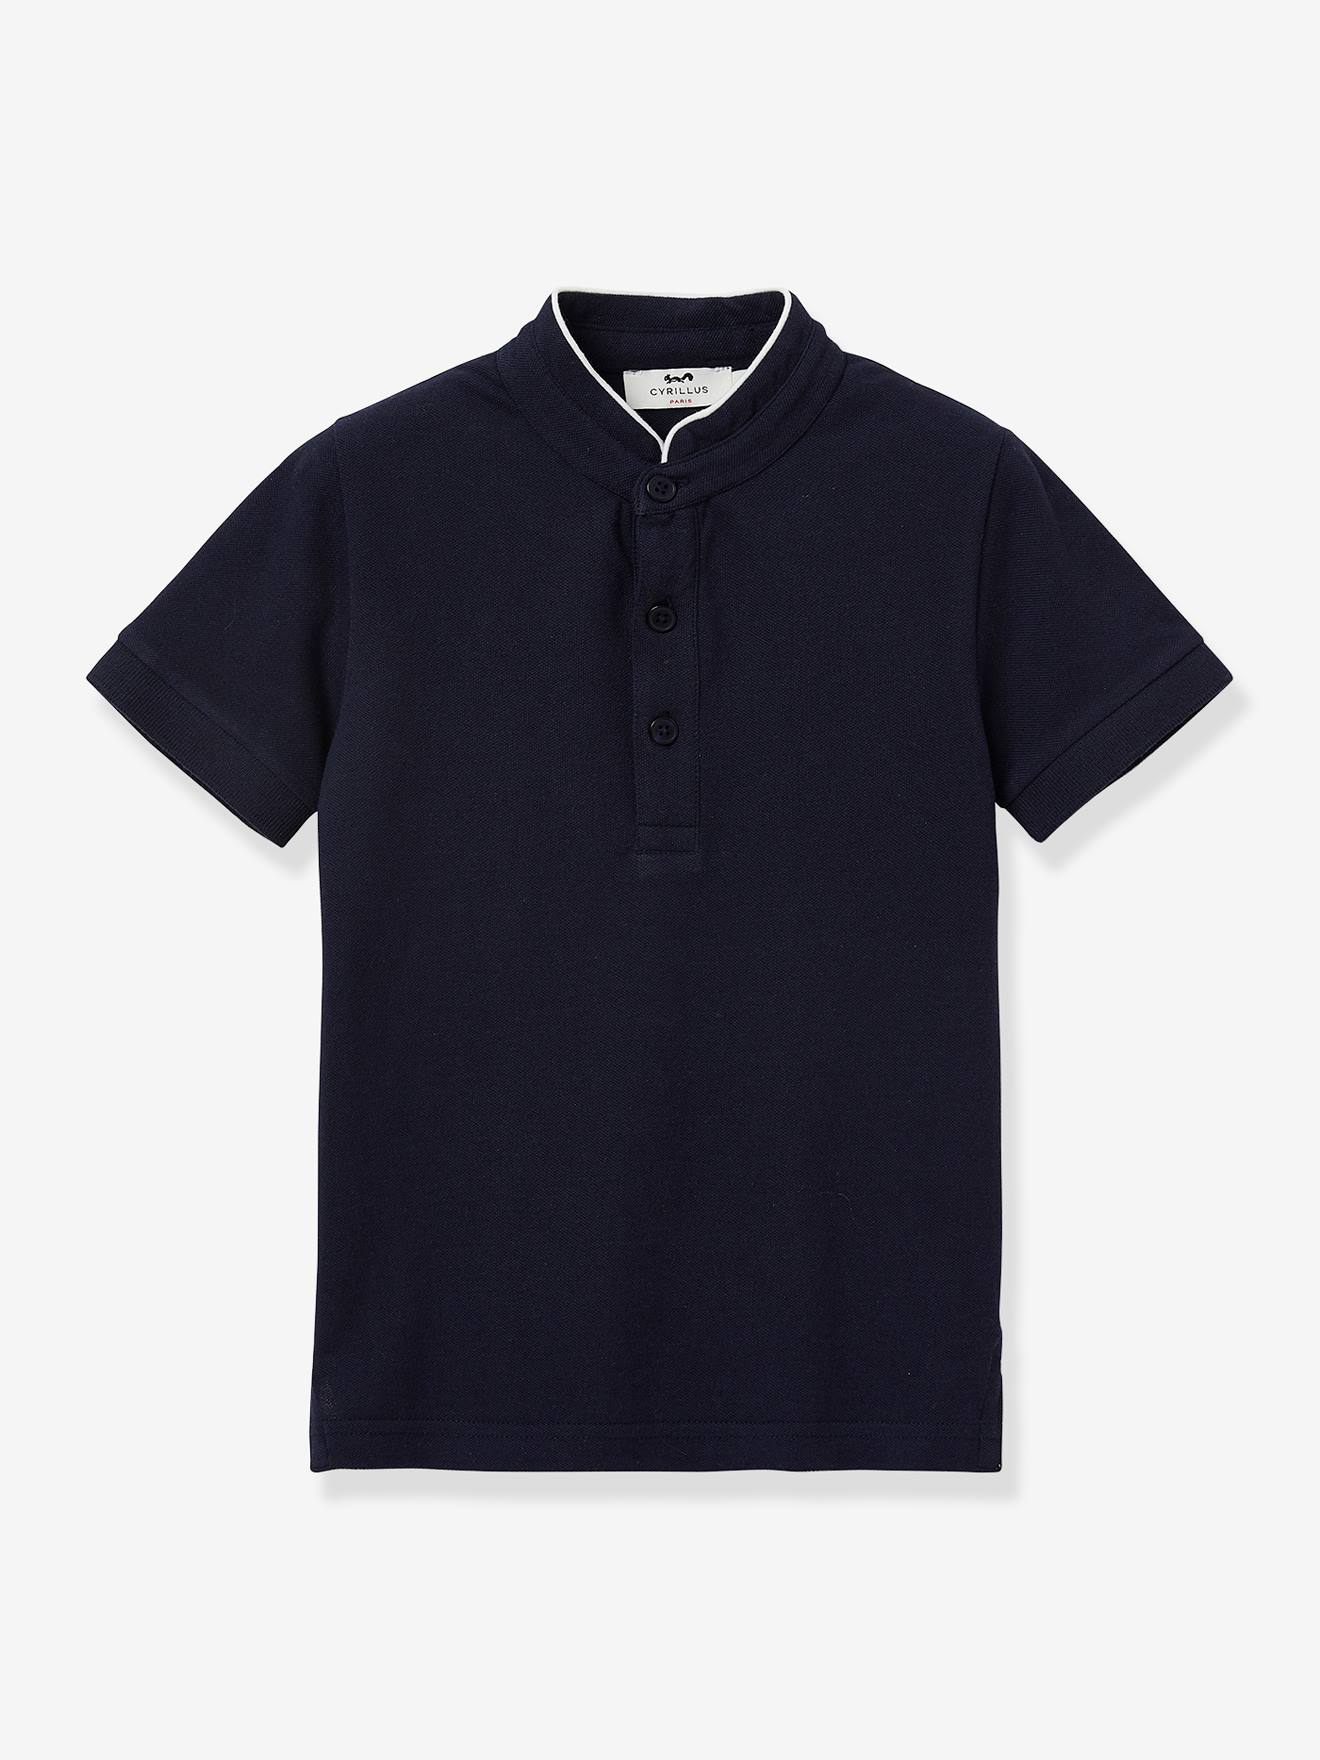 Polo Shirt in Organic Cotton for Boys, by CYRILLUS - navy, Boys ...